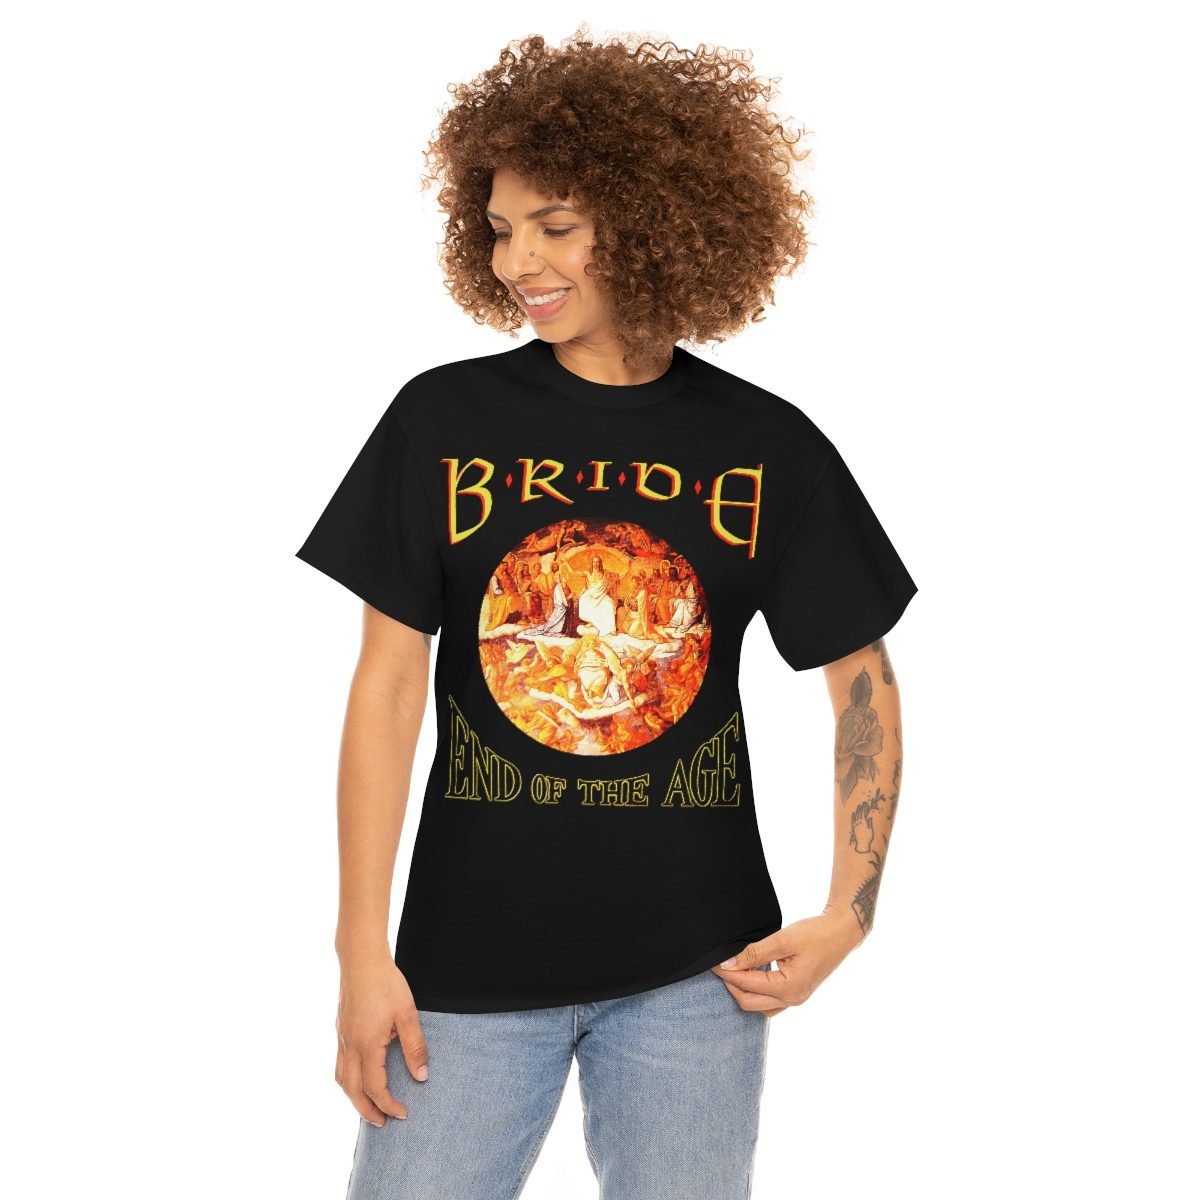 Bride – End of the Age Short Sleeve Tshirt (5000)